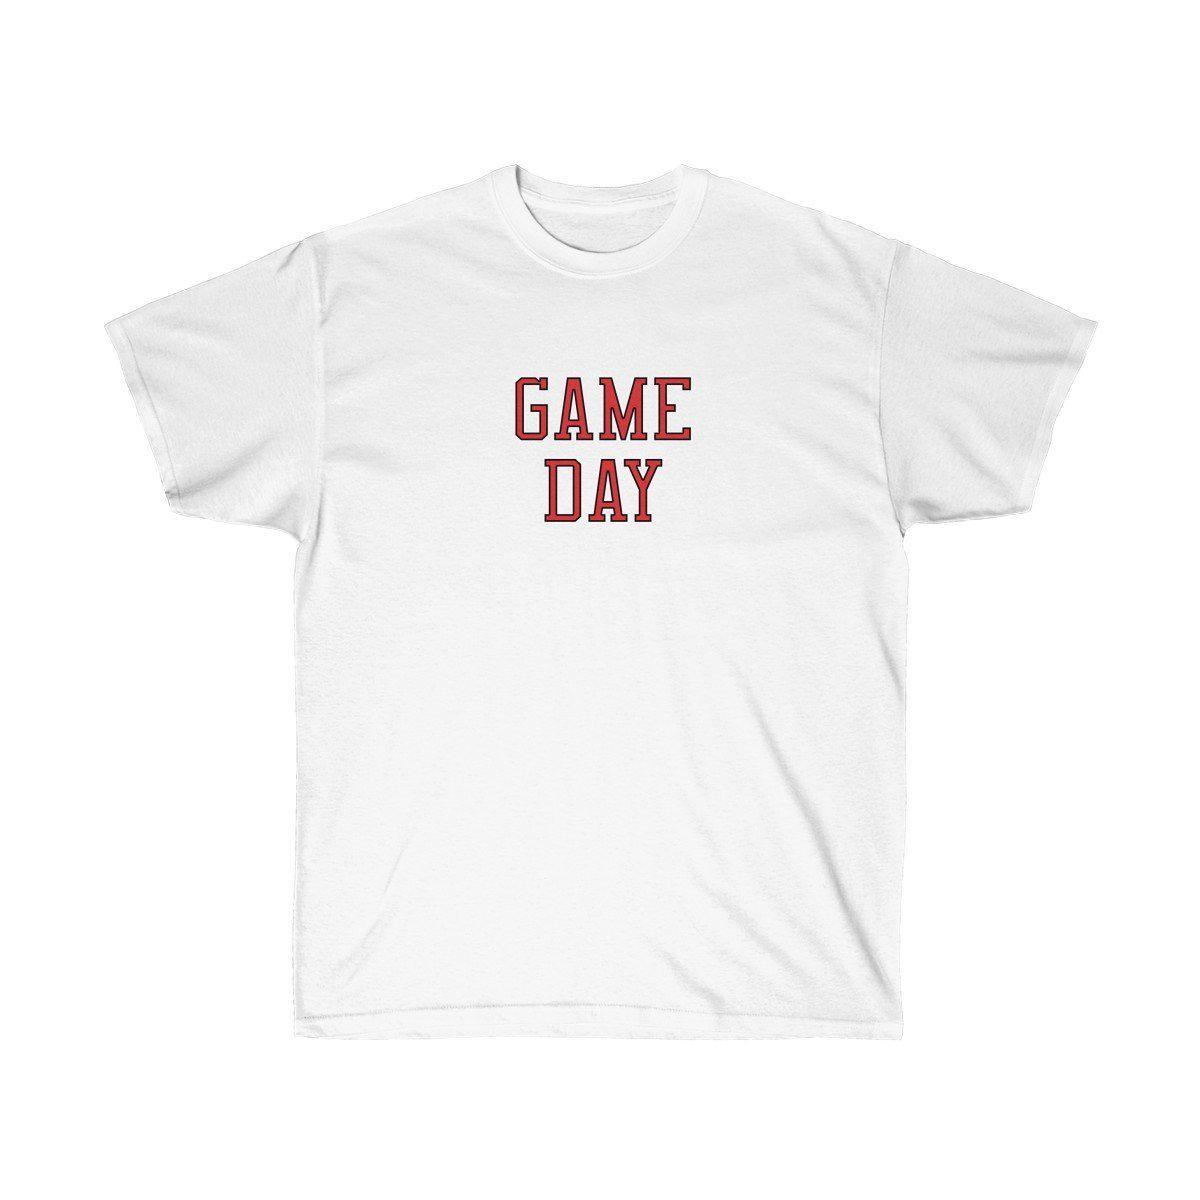 Game Day Tee - Sports T-shirt for Football, Basket, Soccer games-White-S-Archethype